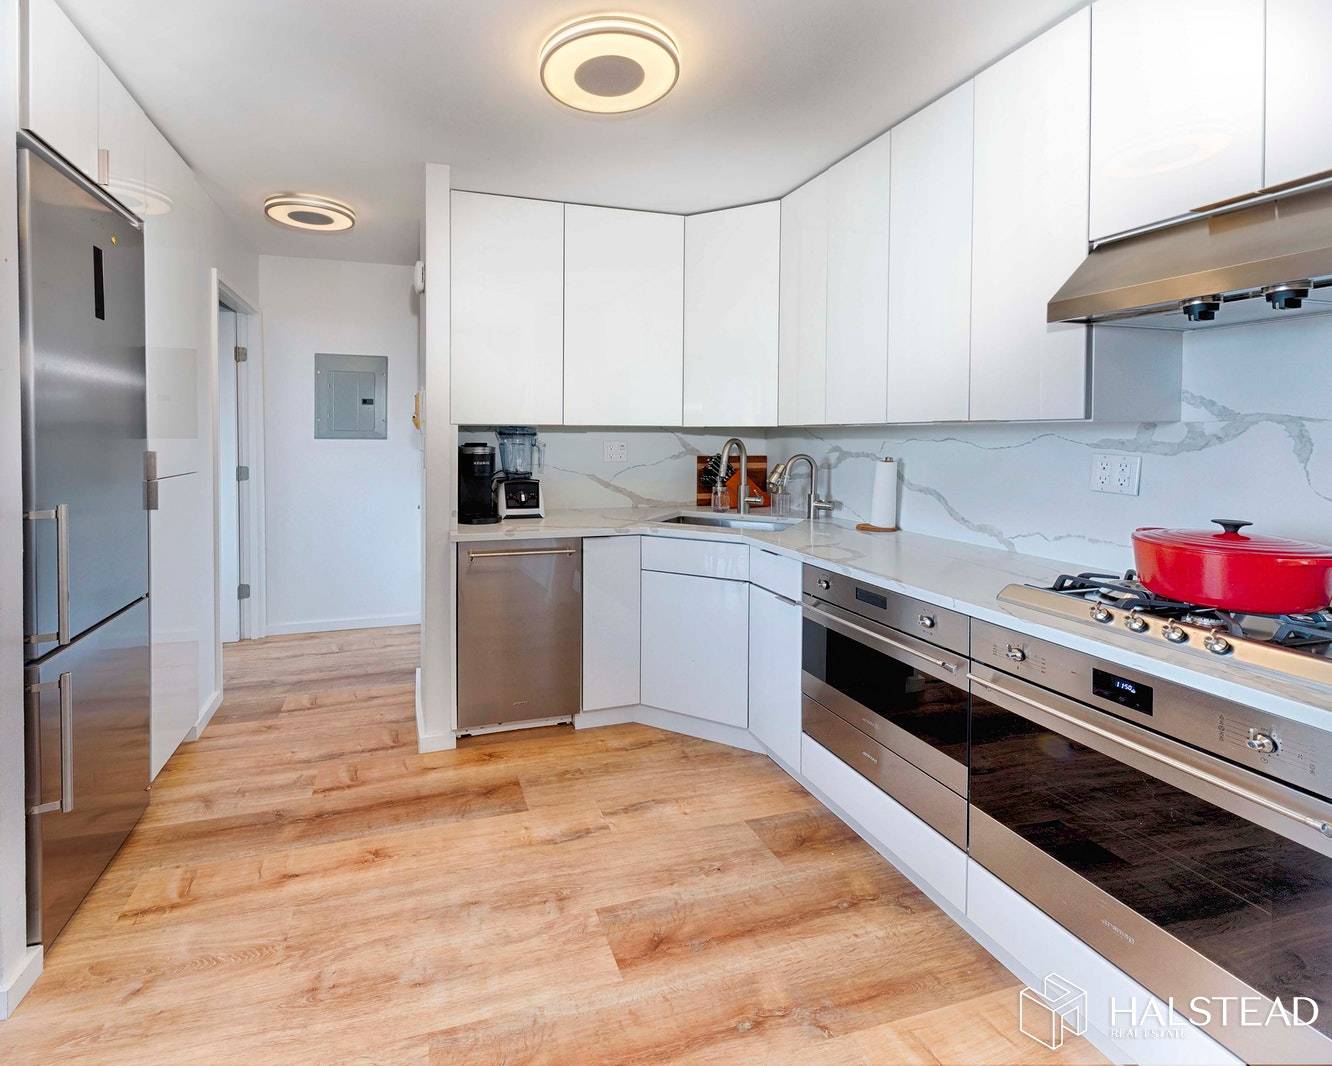 Upon entering this newly gut renovated converted 2 bed apartment, you will be presented with an open floorplan showcasing the unobstructed northern city skyline views !